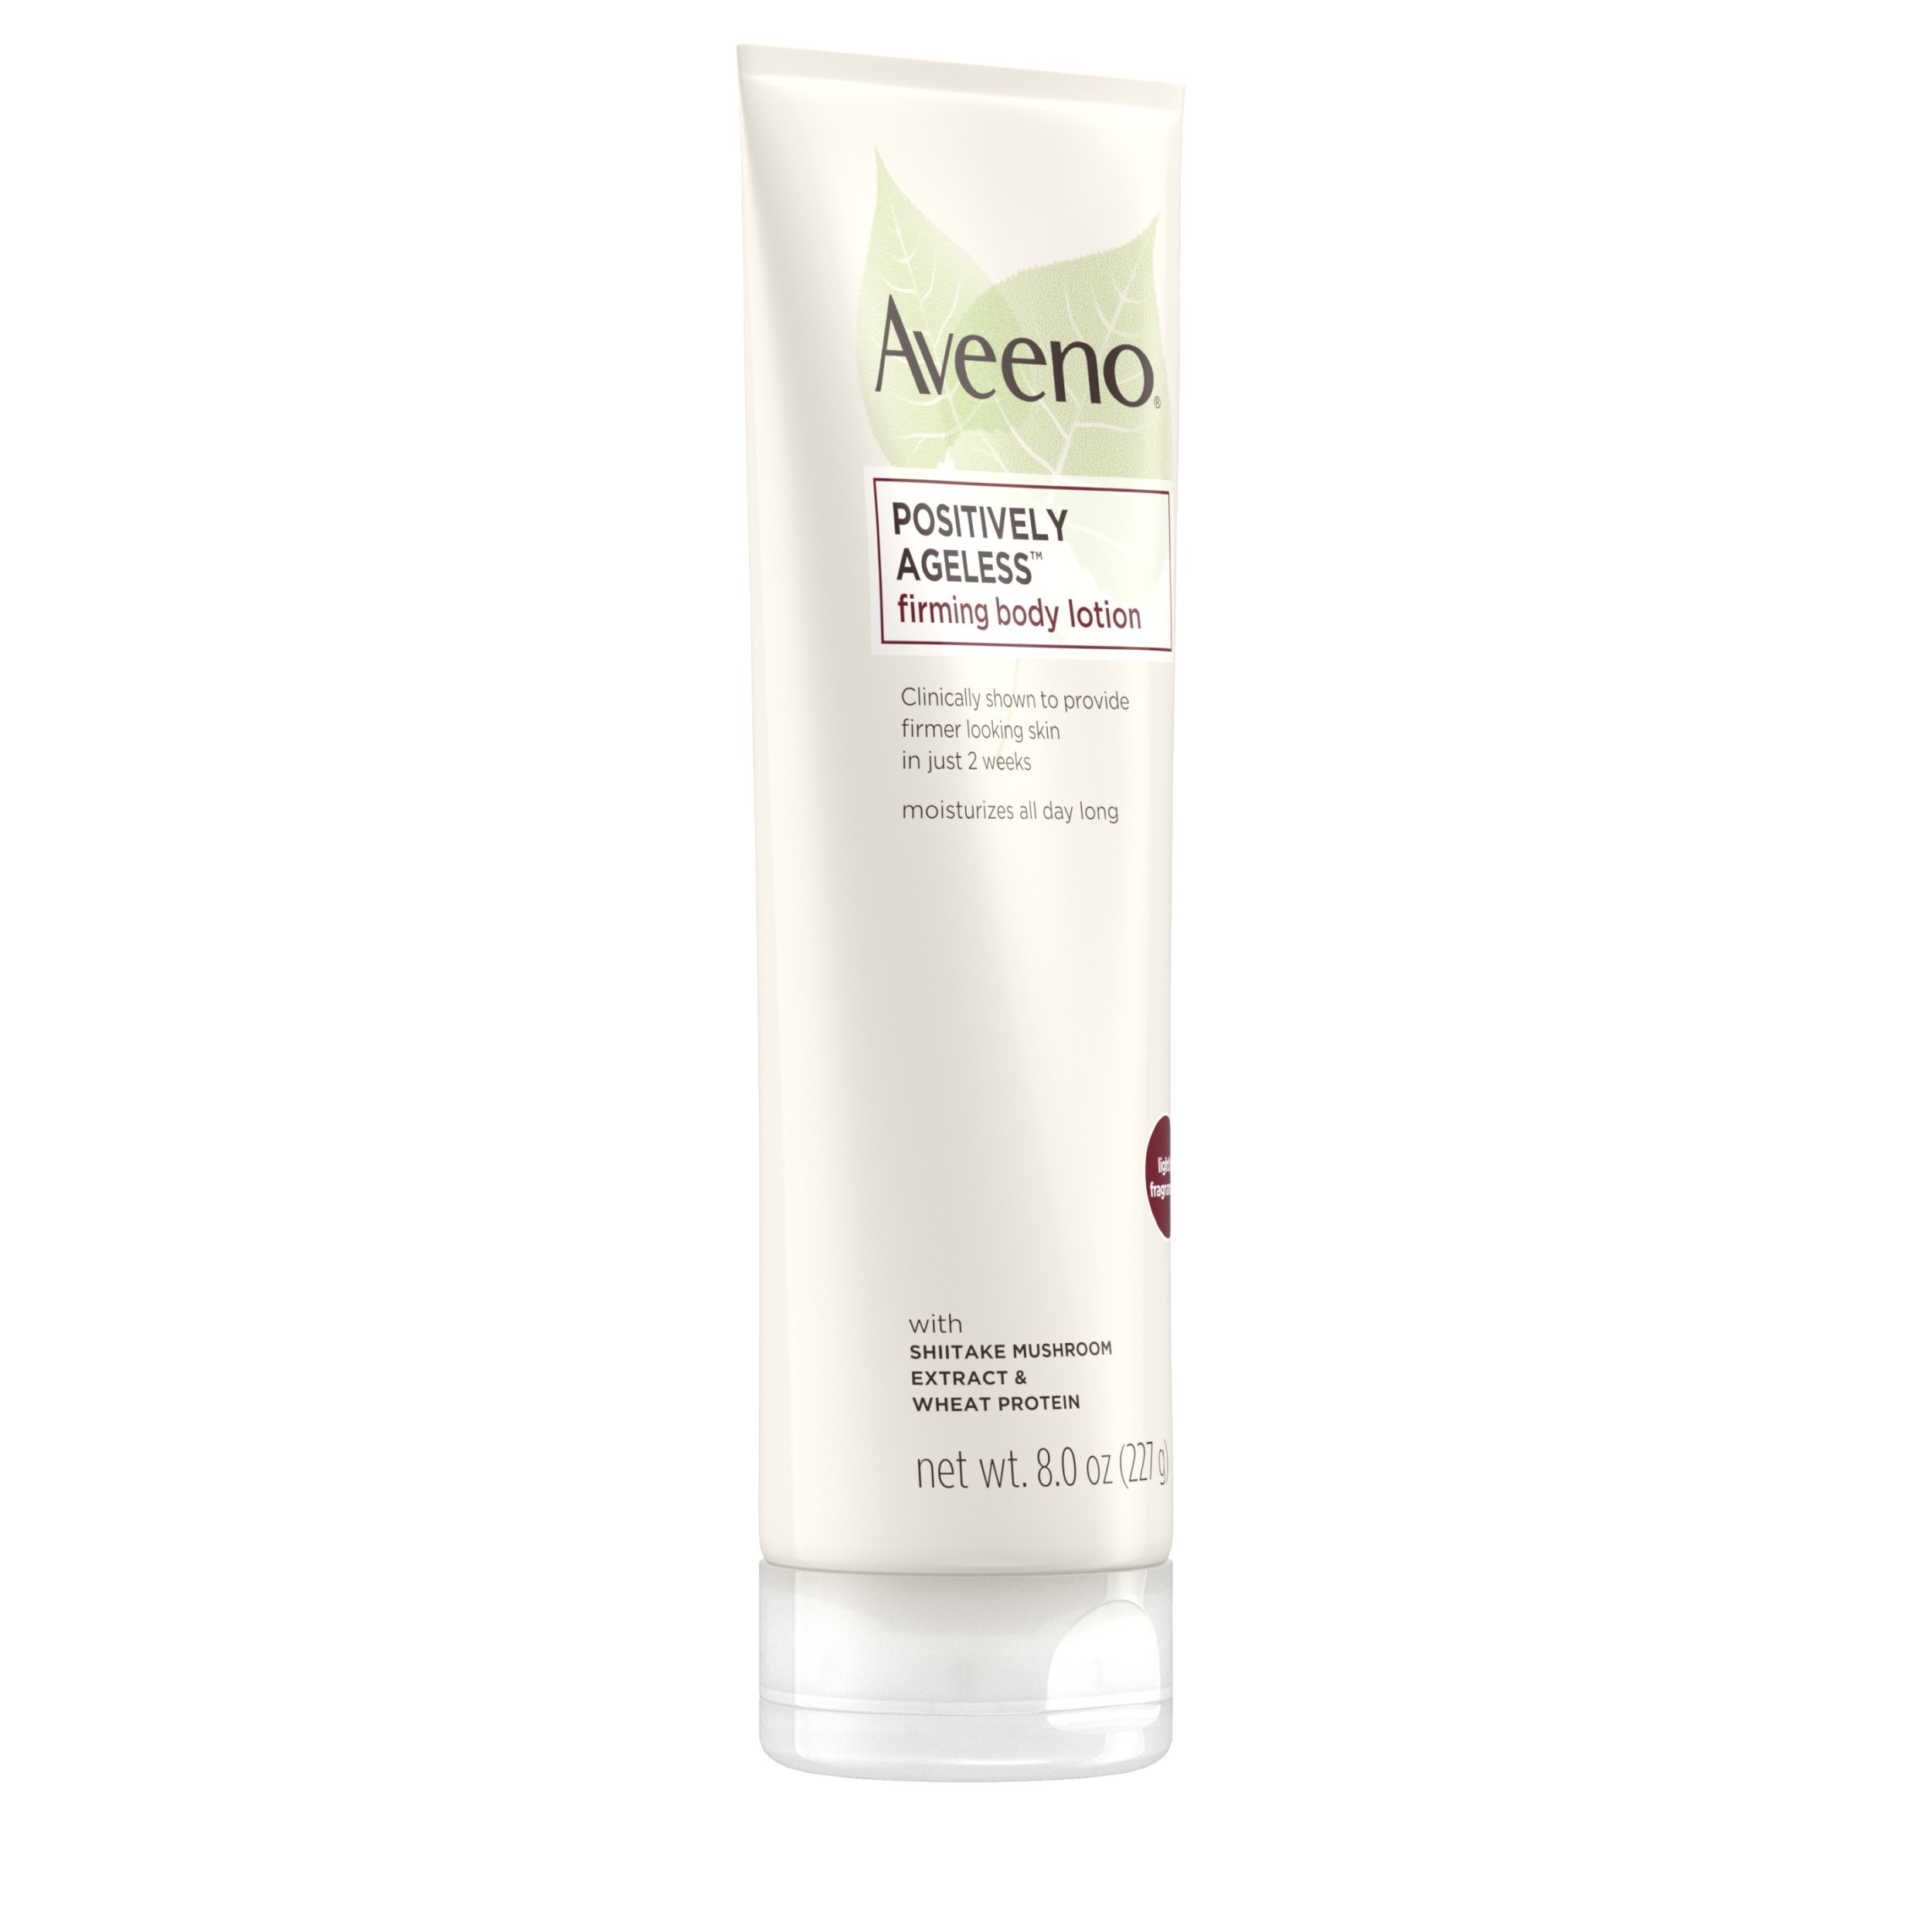 Aveeno Positively Ageless Anti-Aging Firming Body Lotion, 8 oz - image 3 of 7